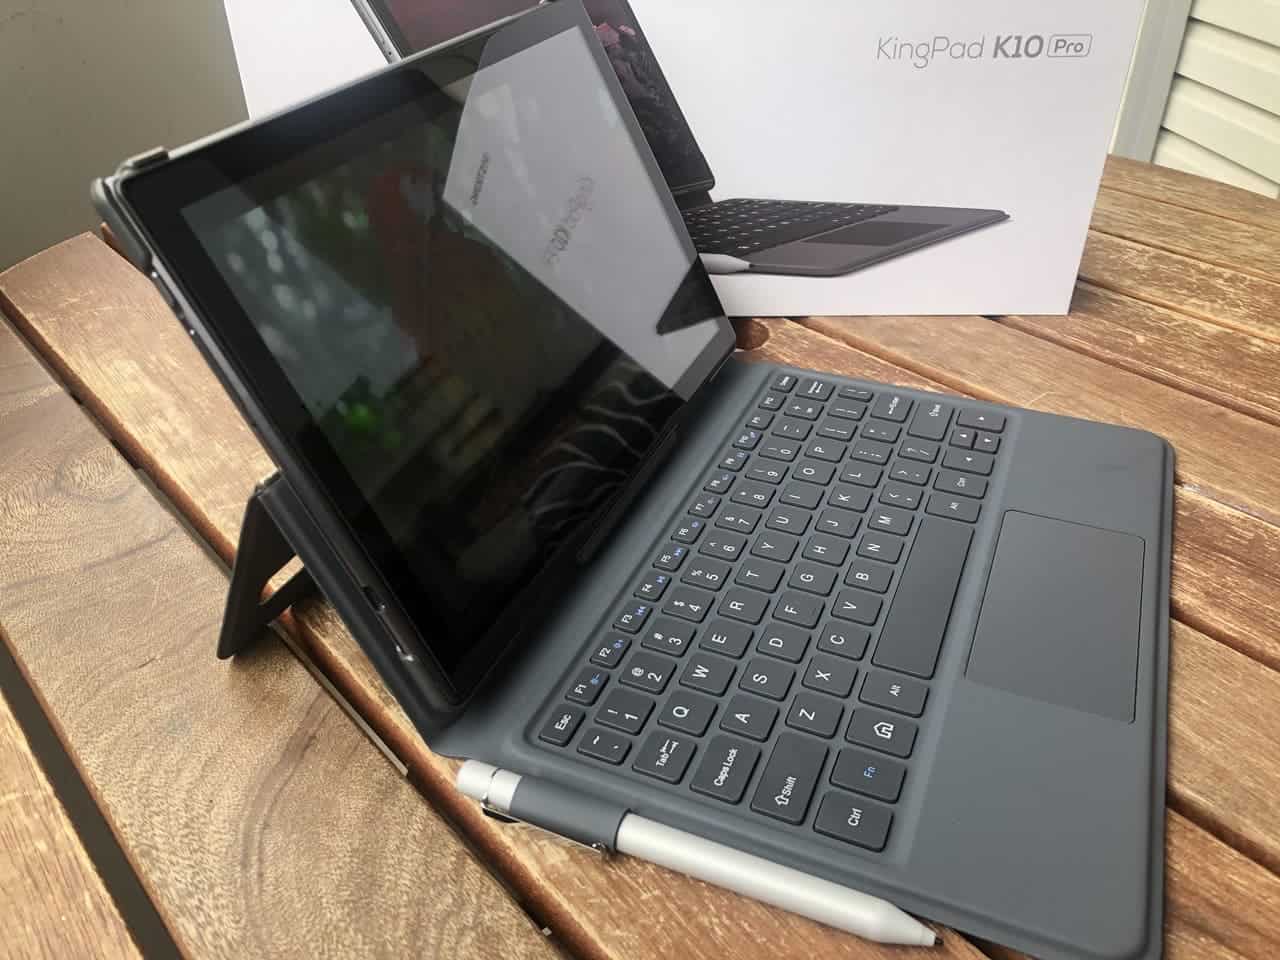 KingPad K10 Pro review: all-in-one Android 10 tablet, and more